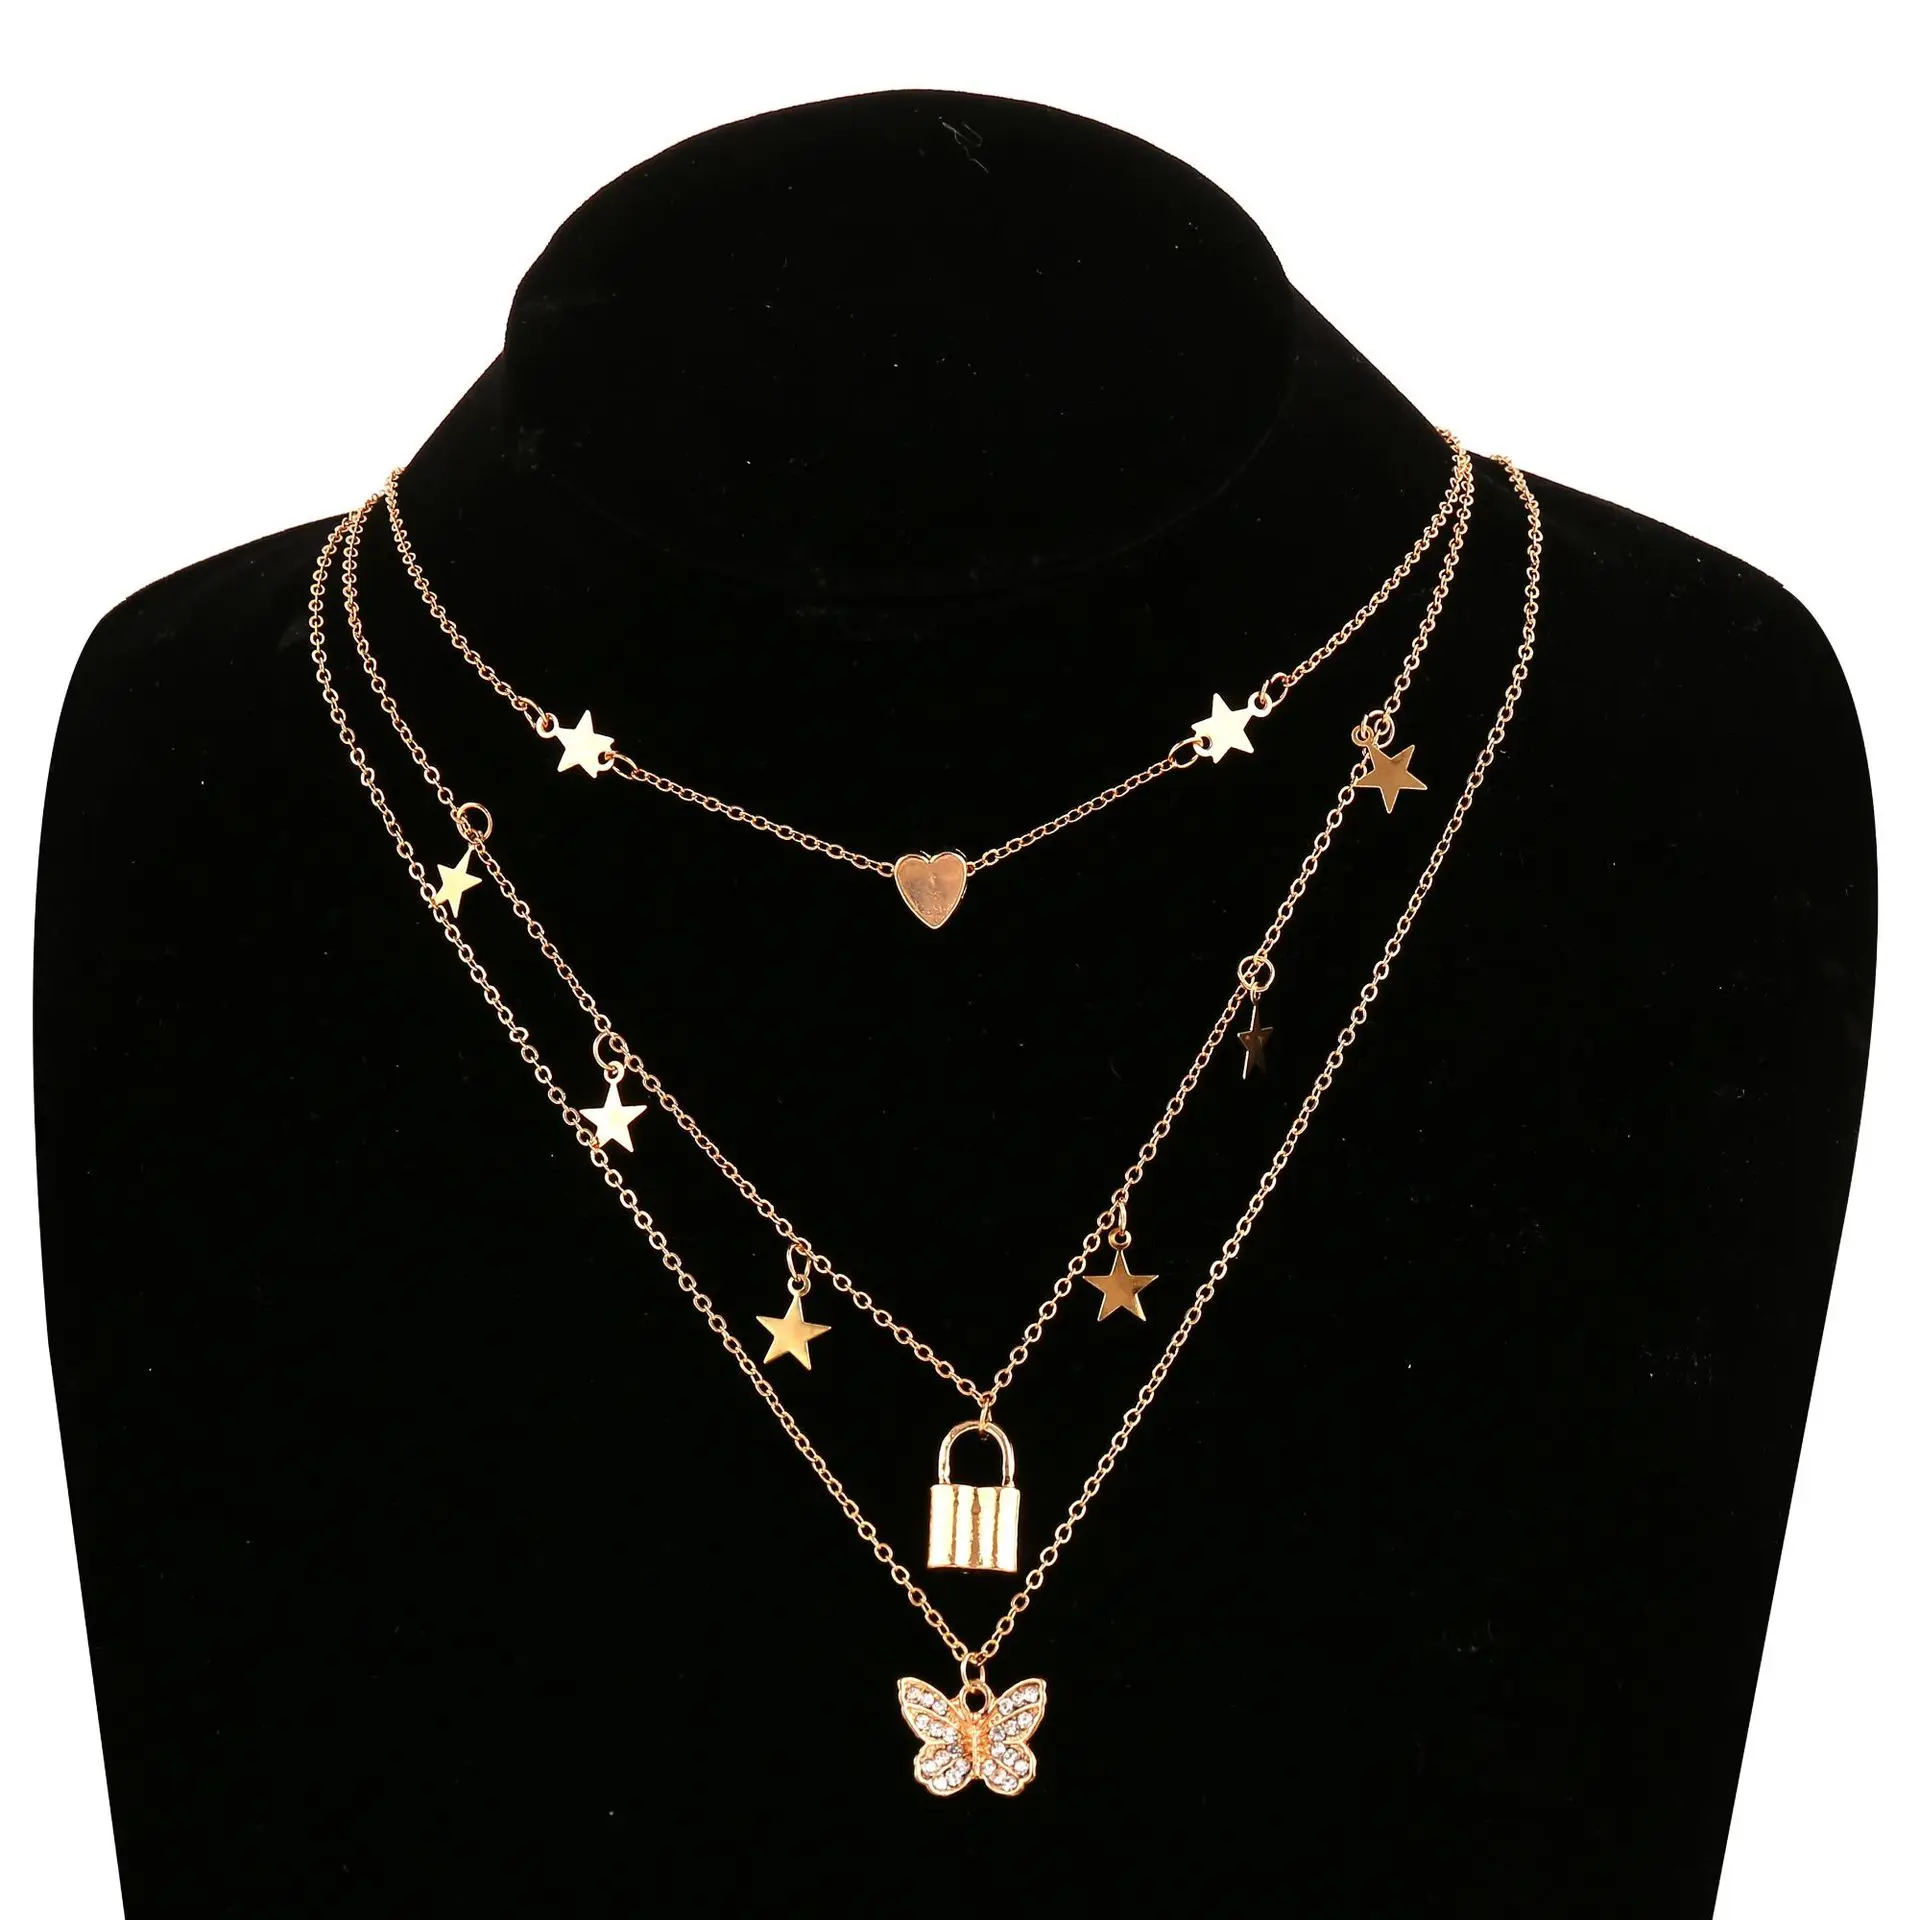 Pendant Necklaces /PACK Punk Heart Butterfly Necklace For Women Girls Wax  Cord Chain Fashion Trendy Party Gifts From Value111, $6.4